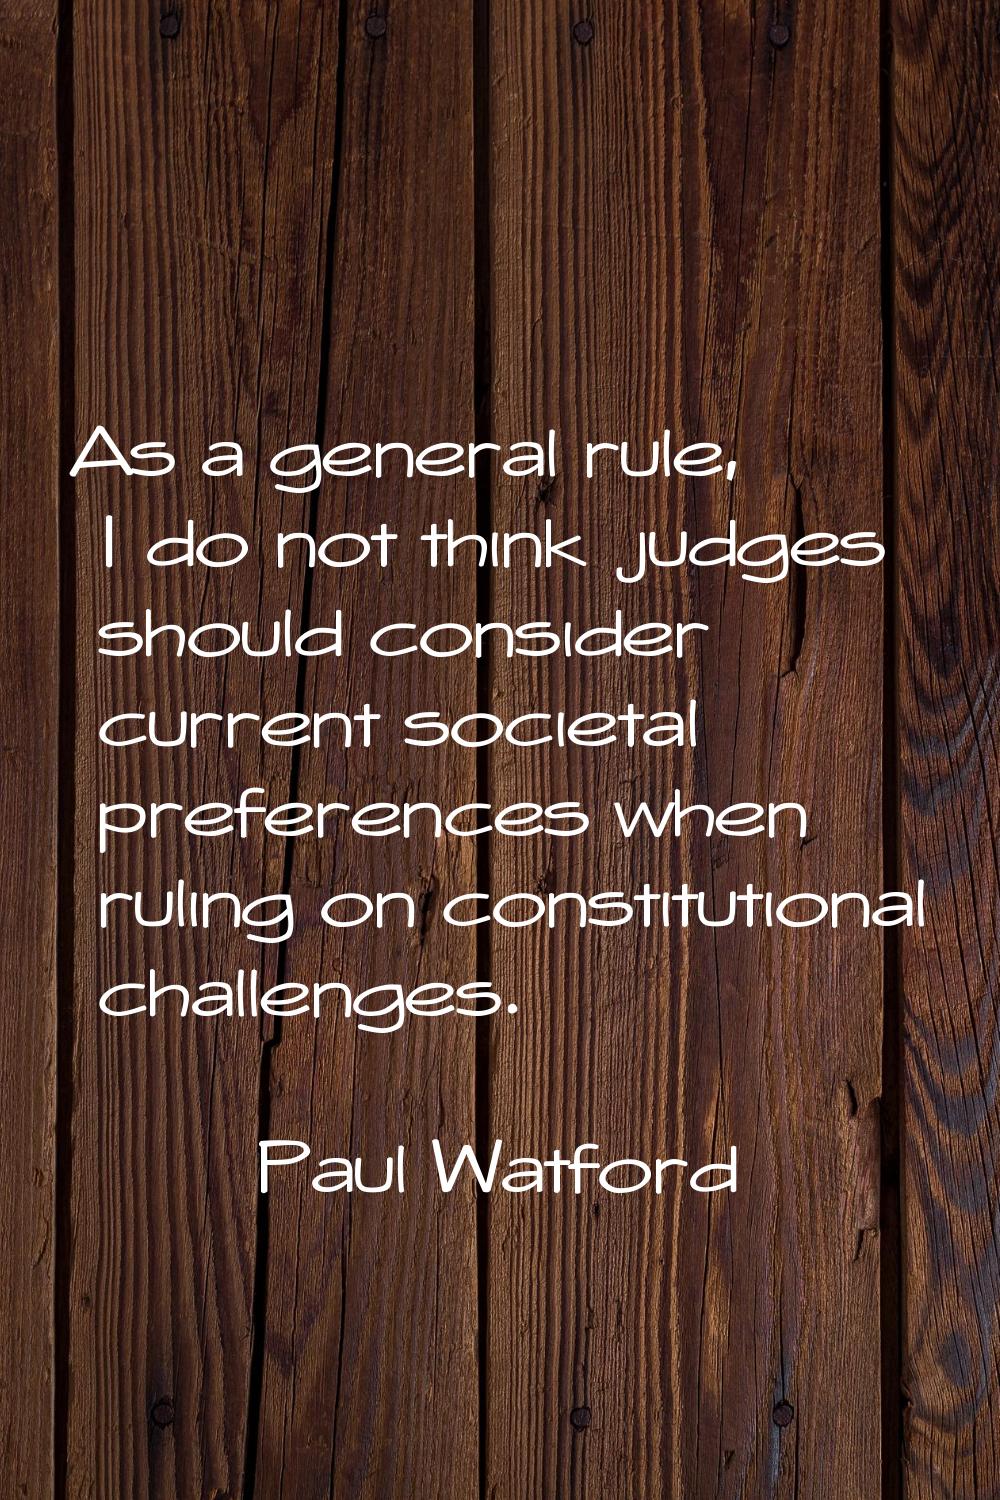 As a general rule, I do not think judges should consider current societal preferences when ruling o